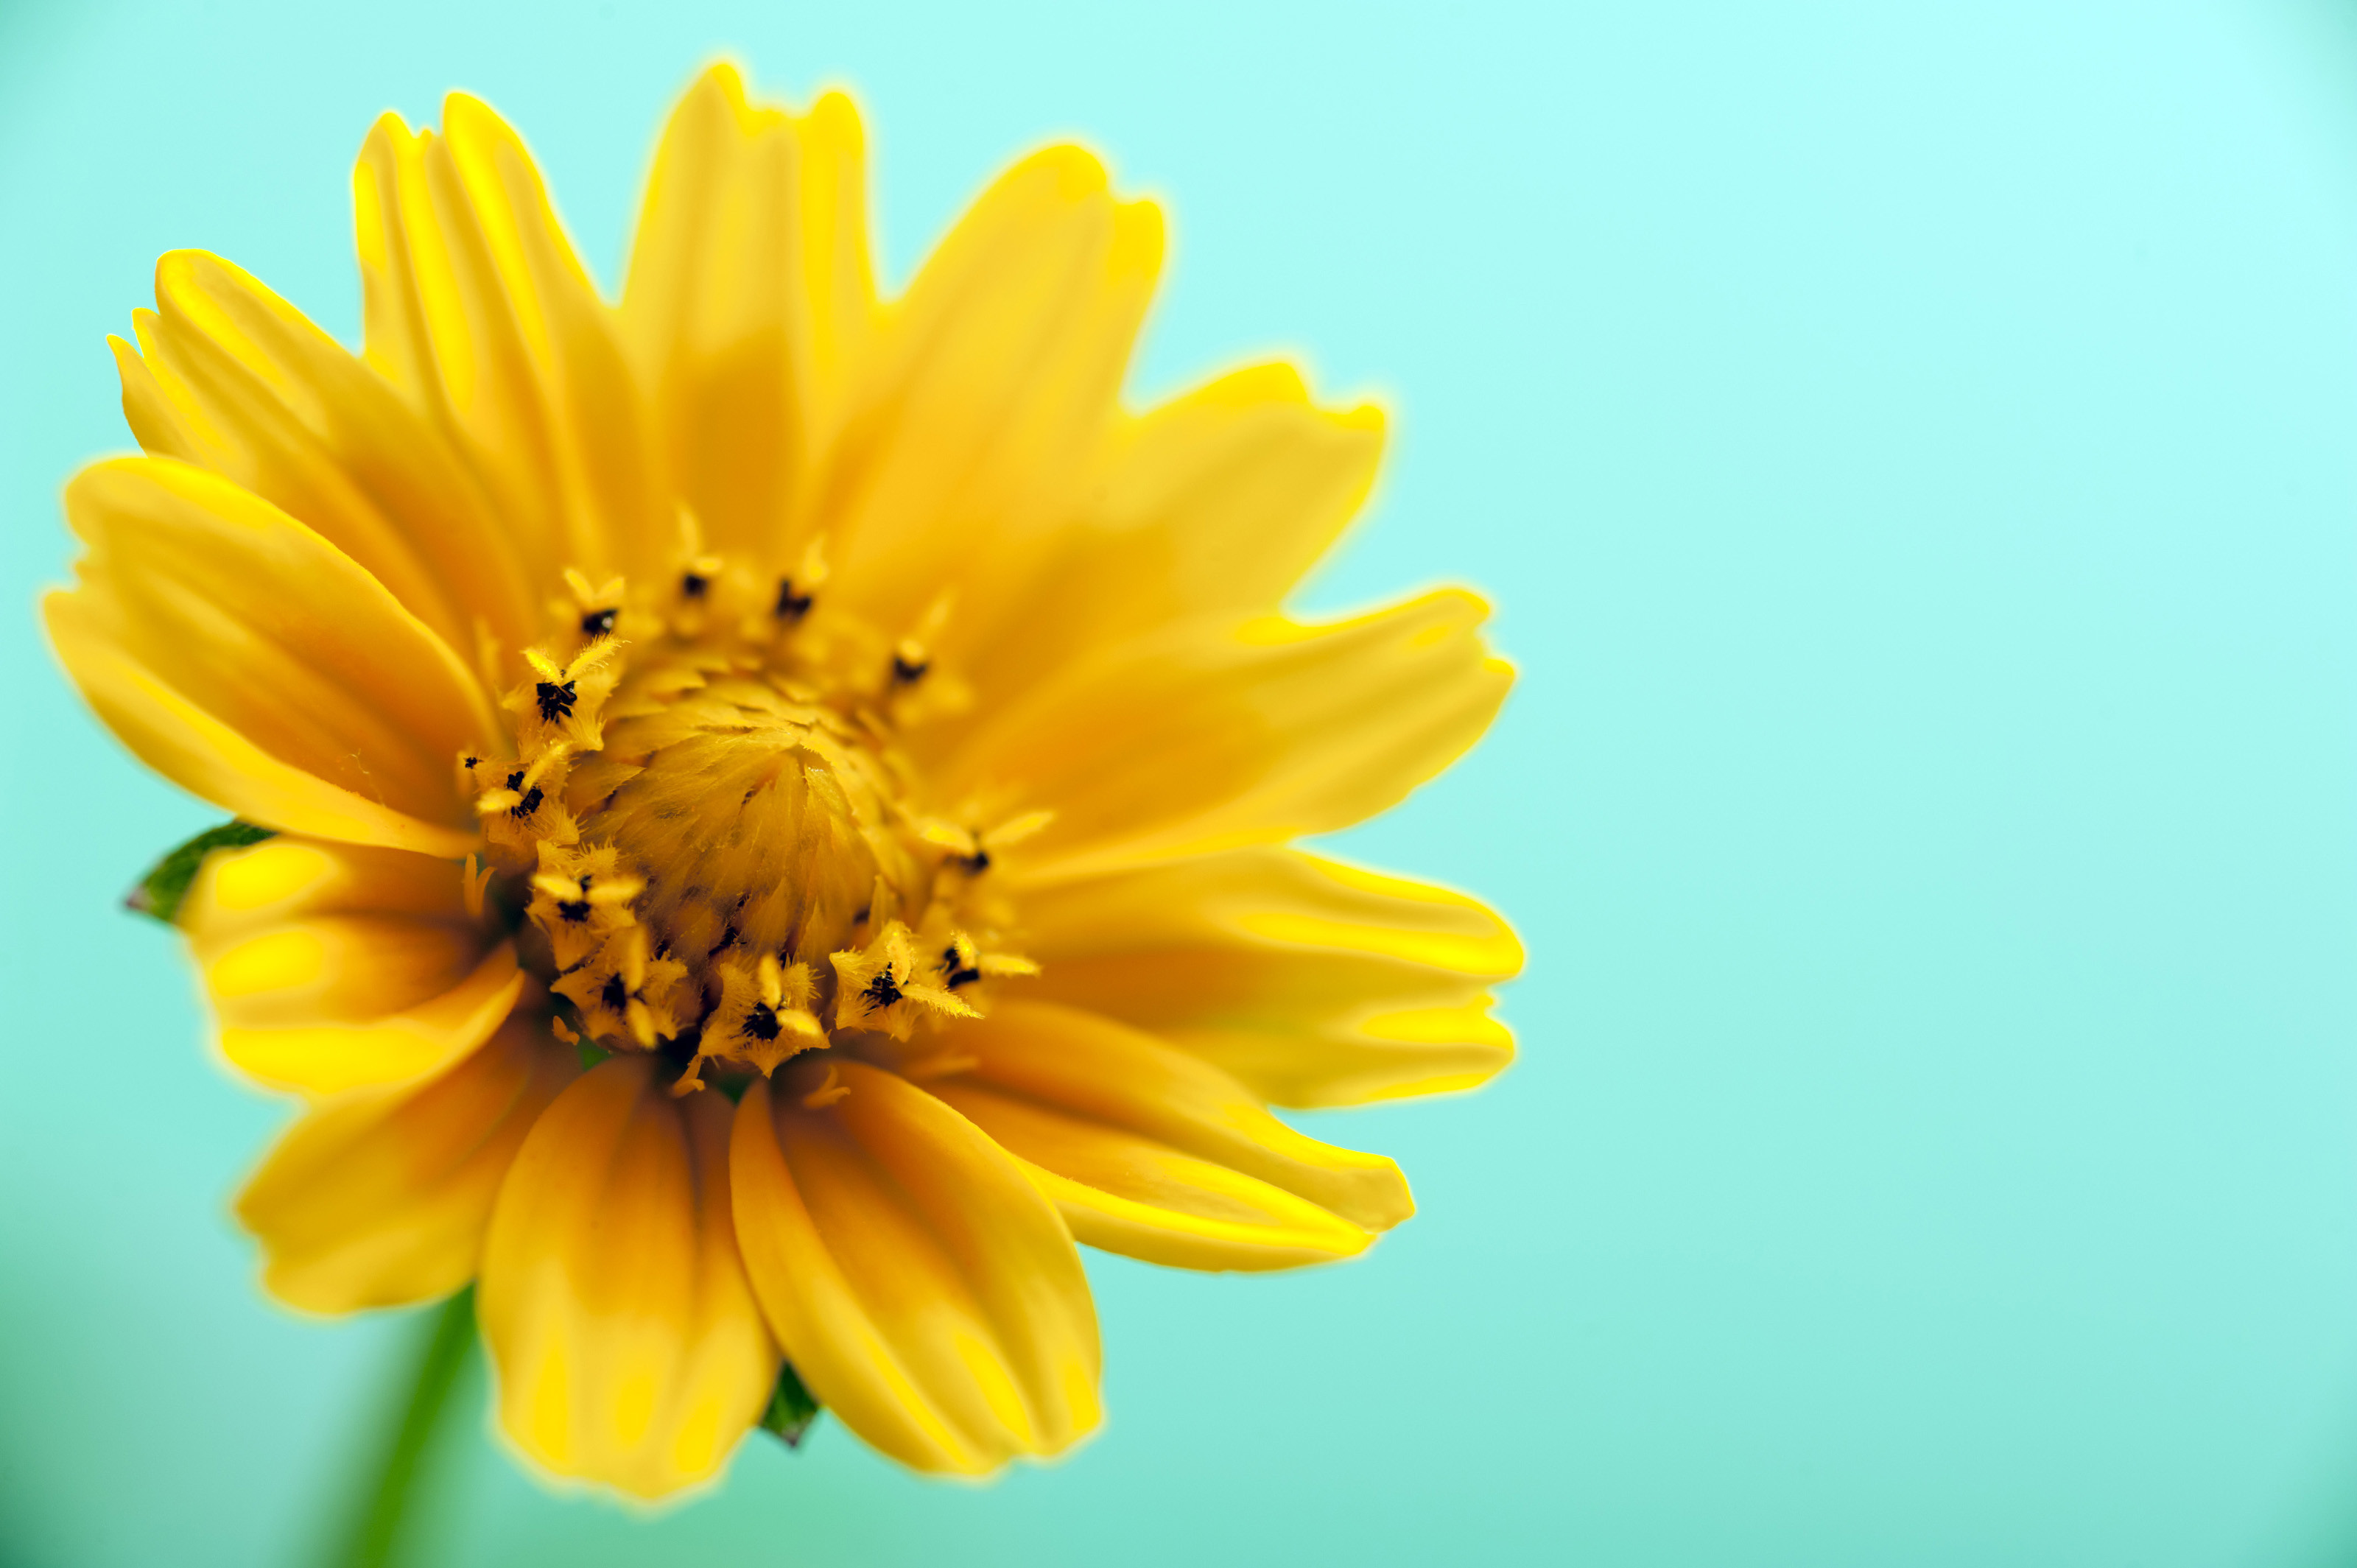 3200x2129 Yellow calendula spring flower close-up image over light cyan background  with copy space